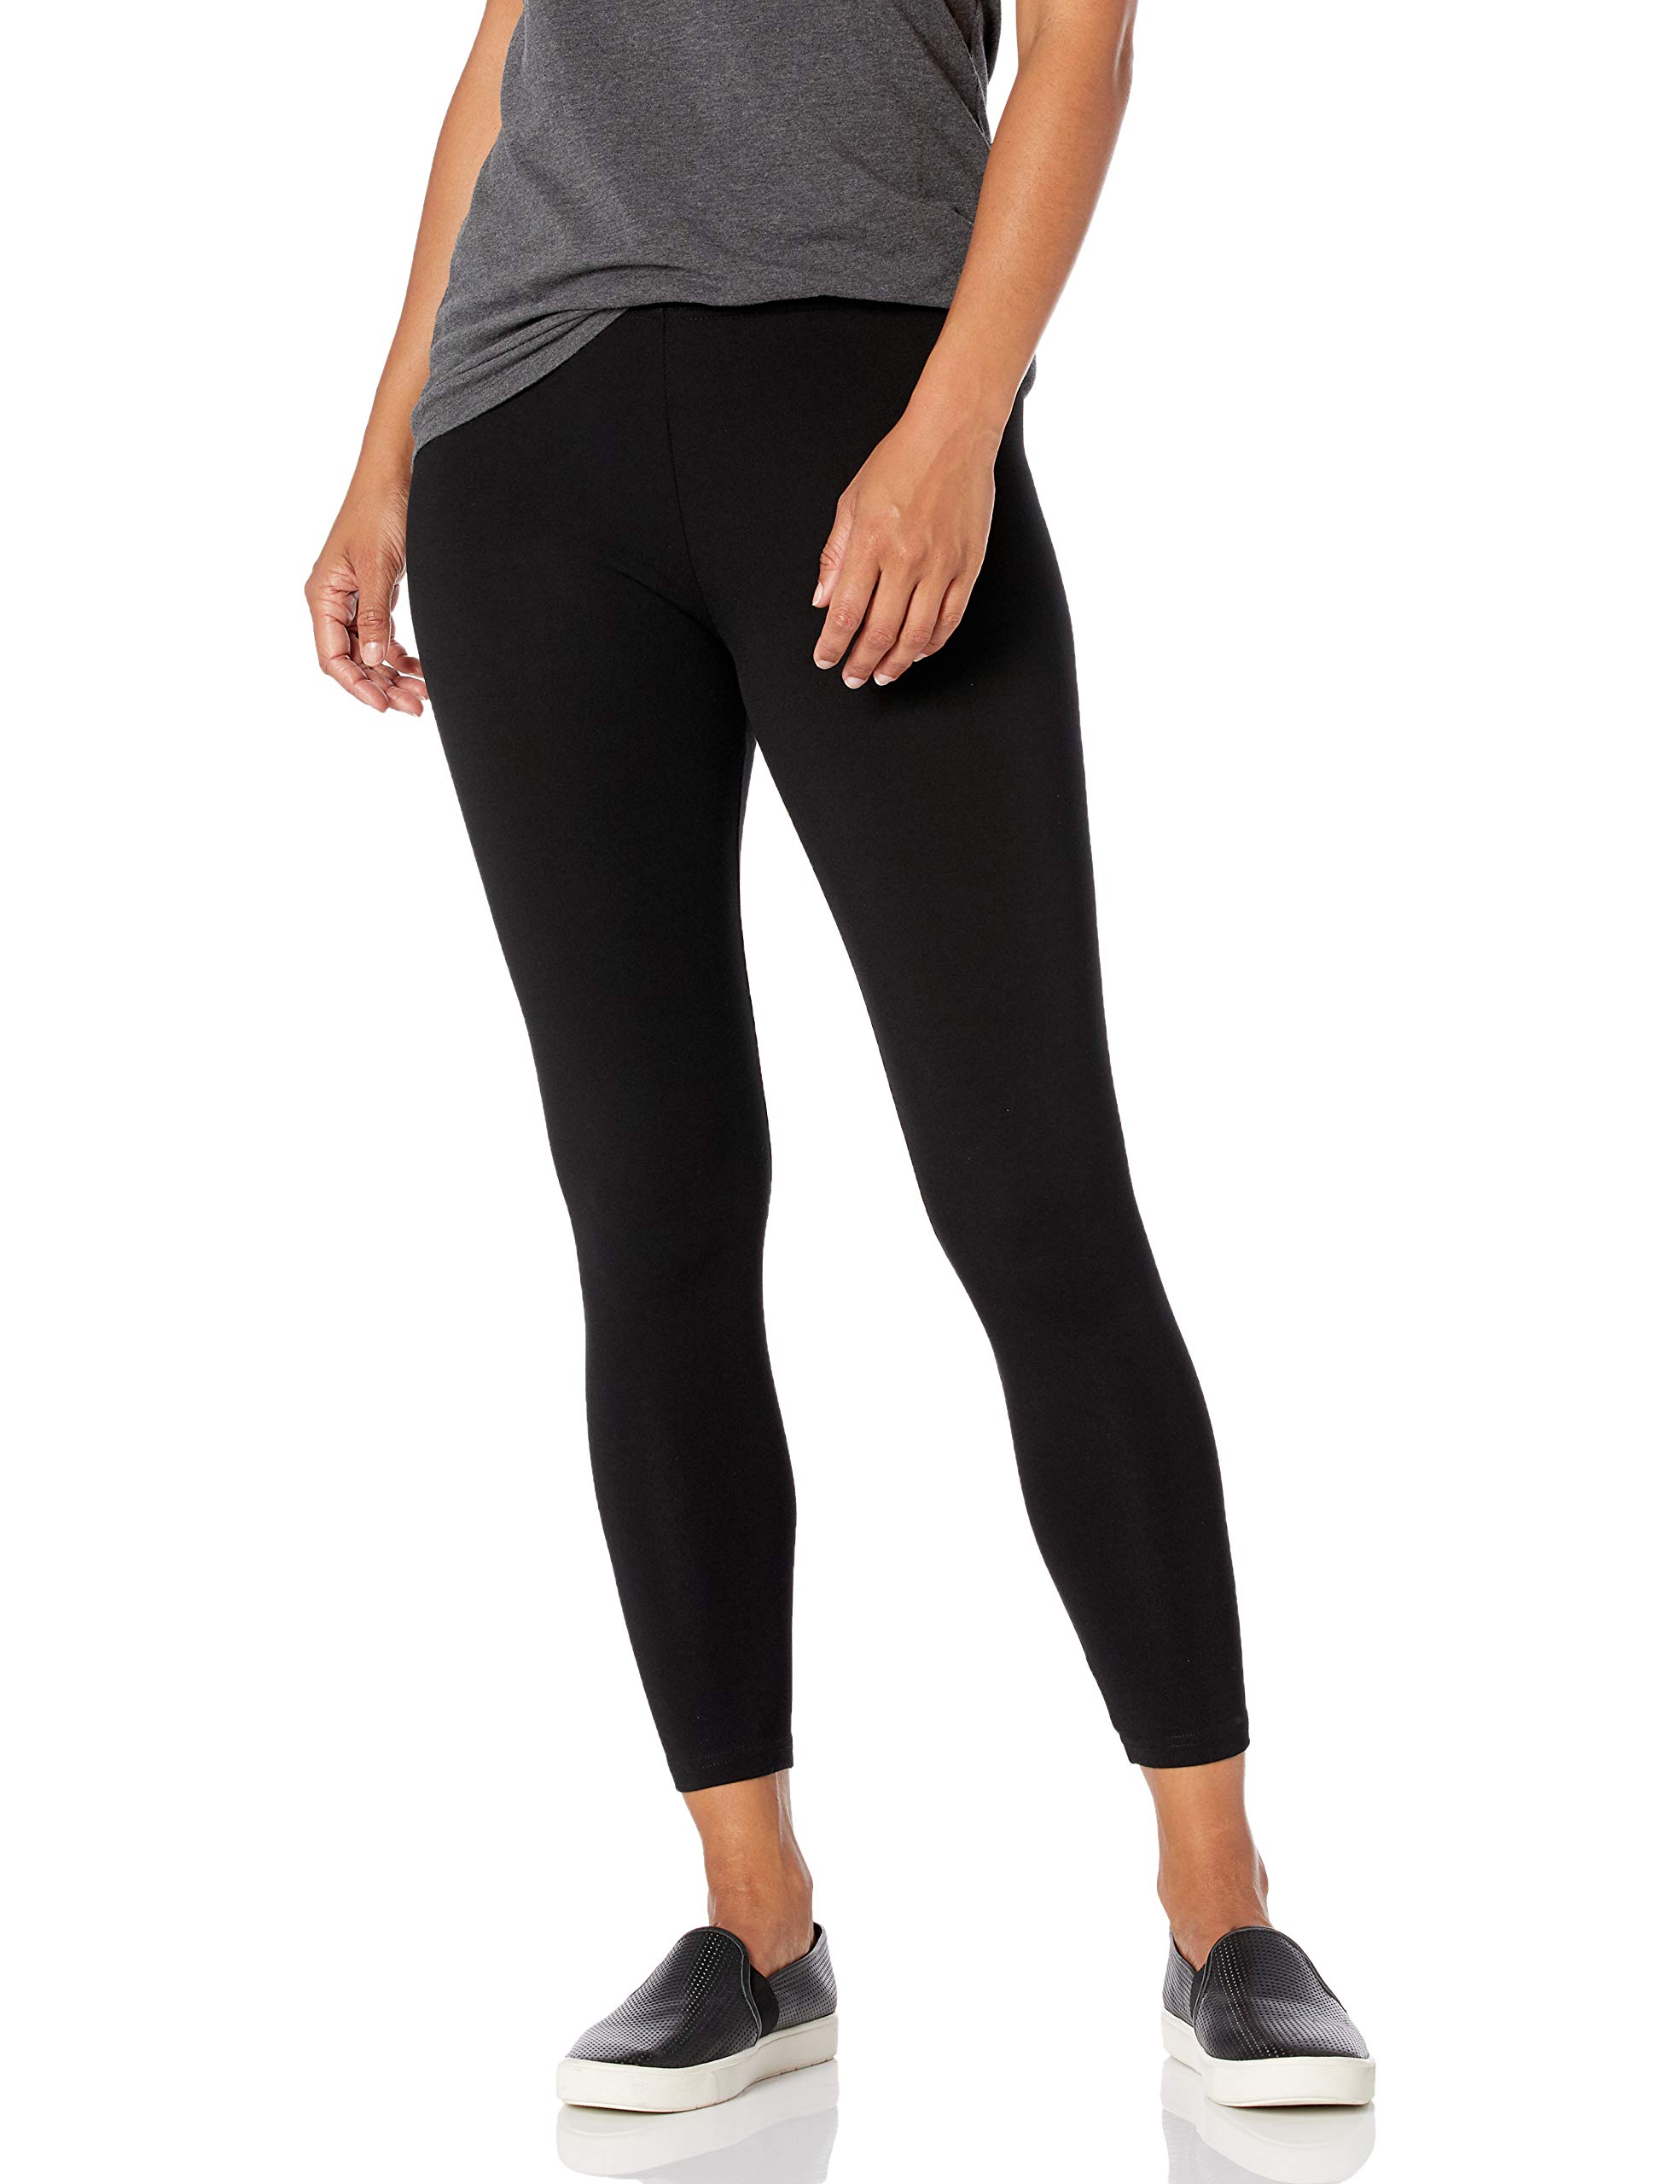 NexiEpoch Buttery Soft Leggings For Women - High Waisted Capri Tummy  Control Yoga Pants For Workout